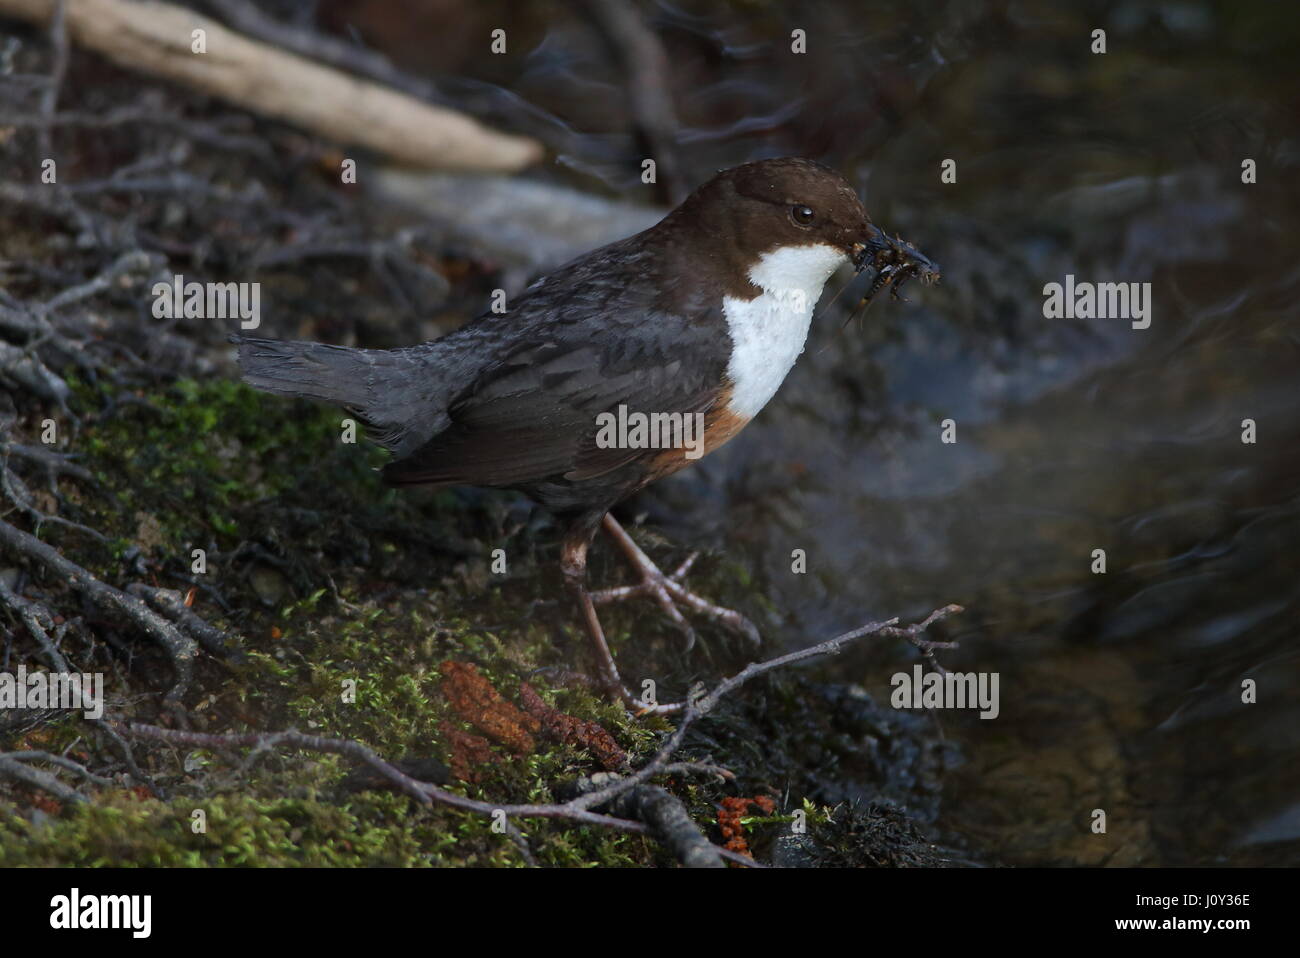 Adult Dipper feeding young in the nest Stock Photo